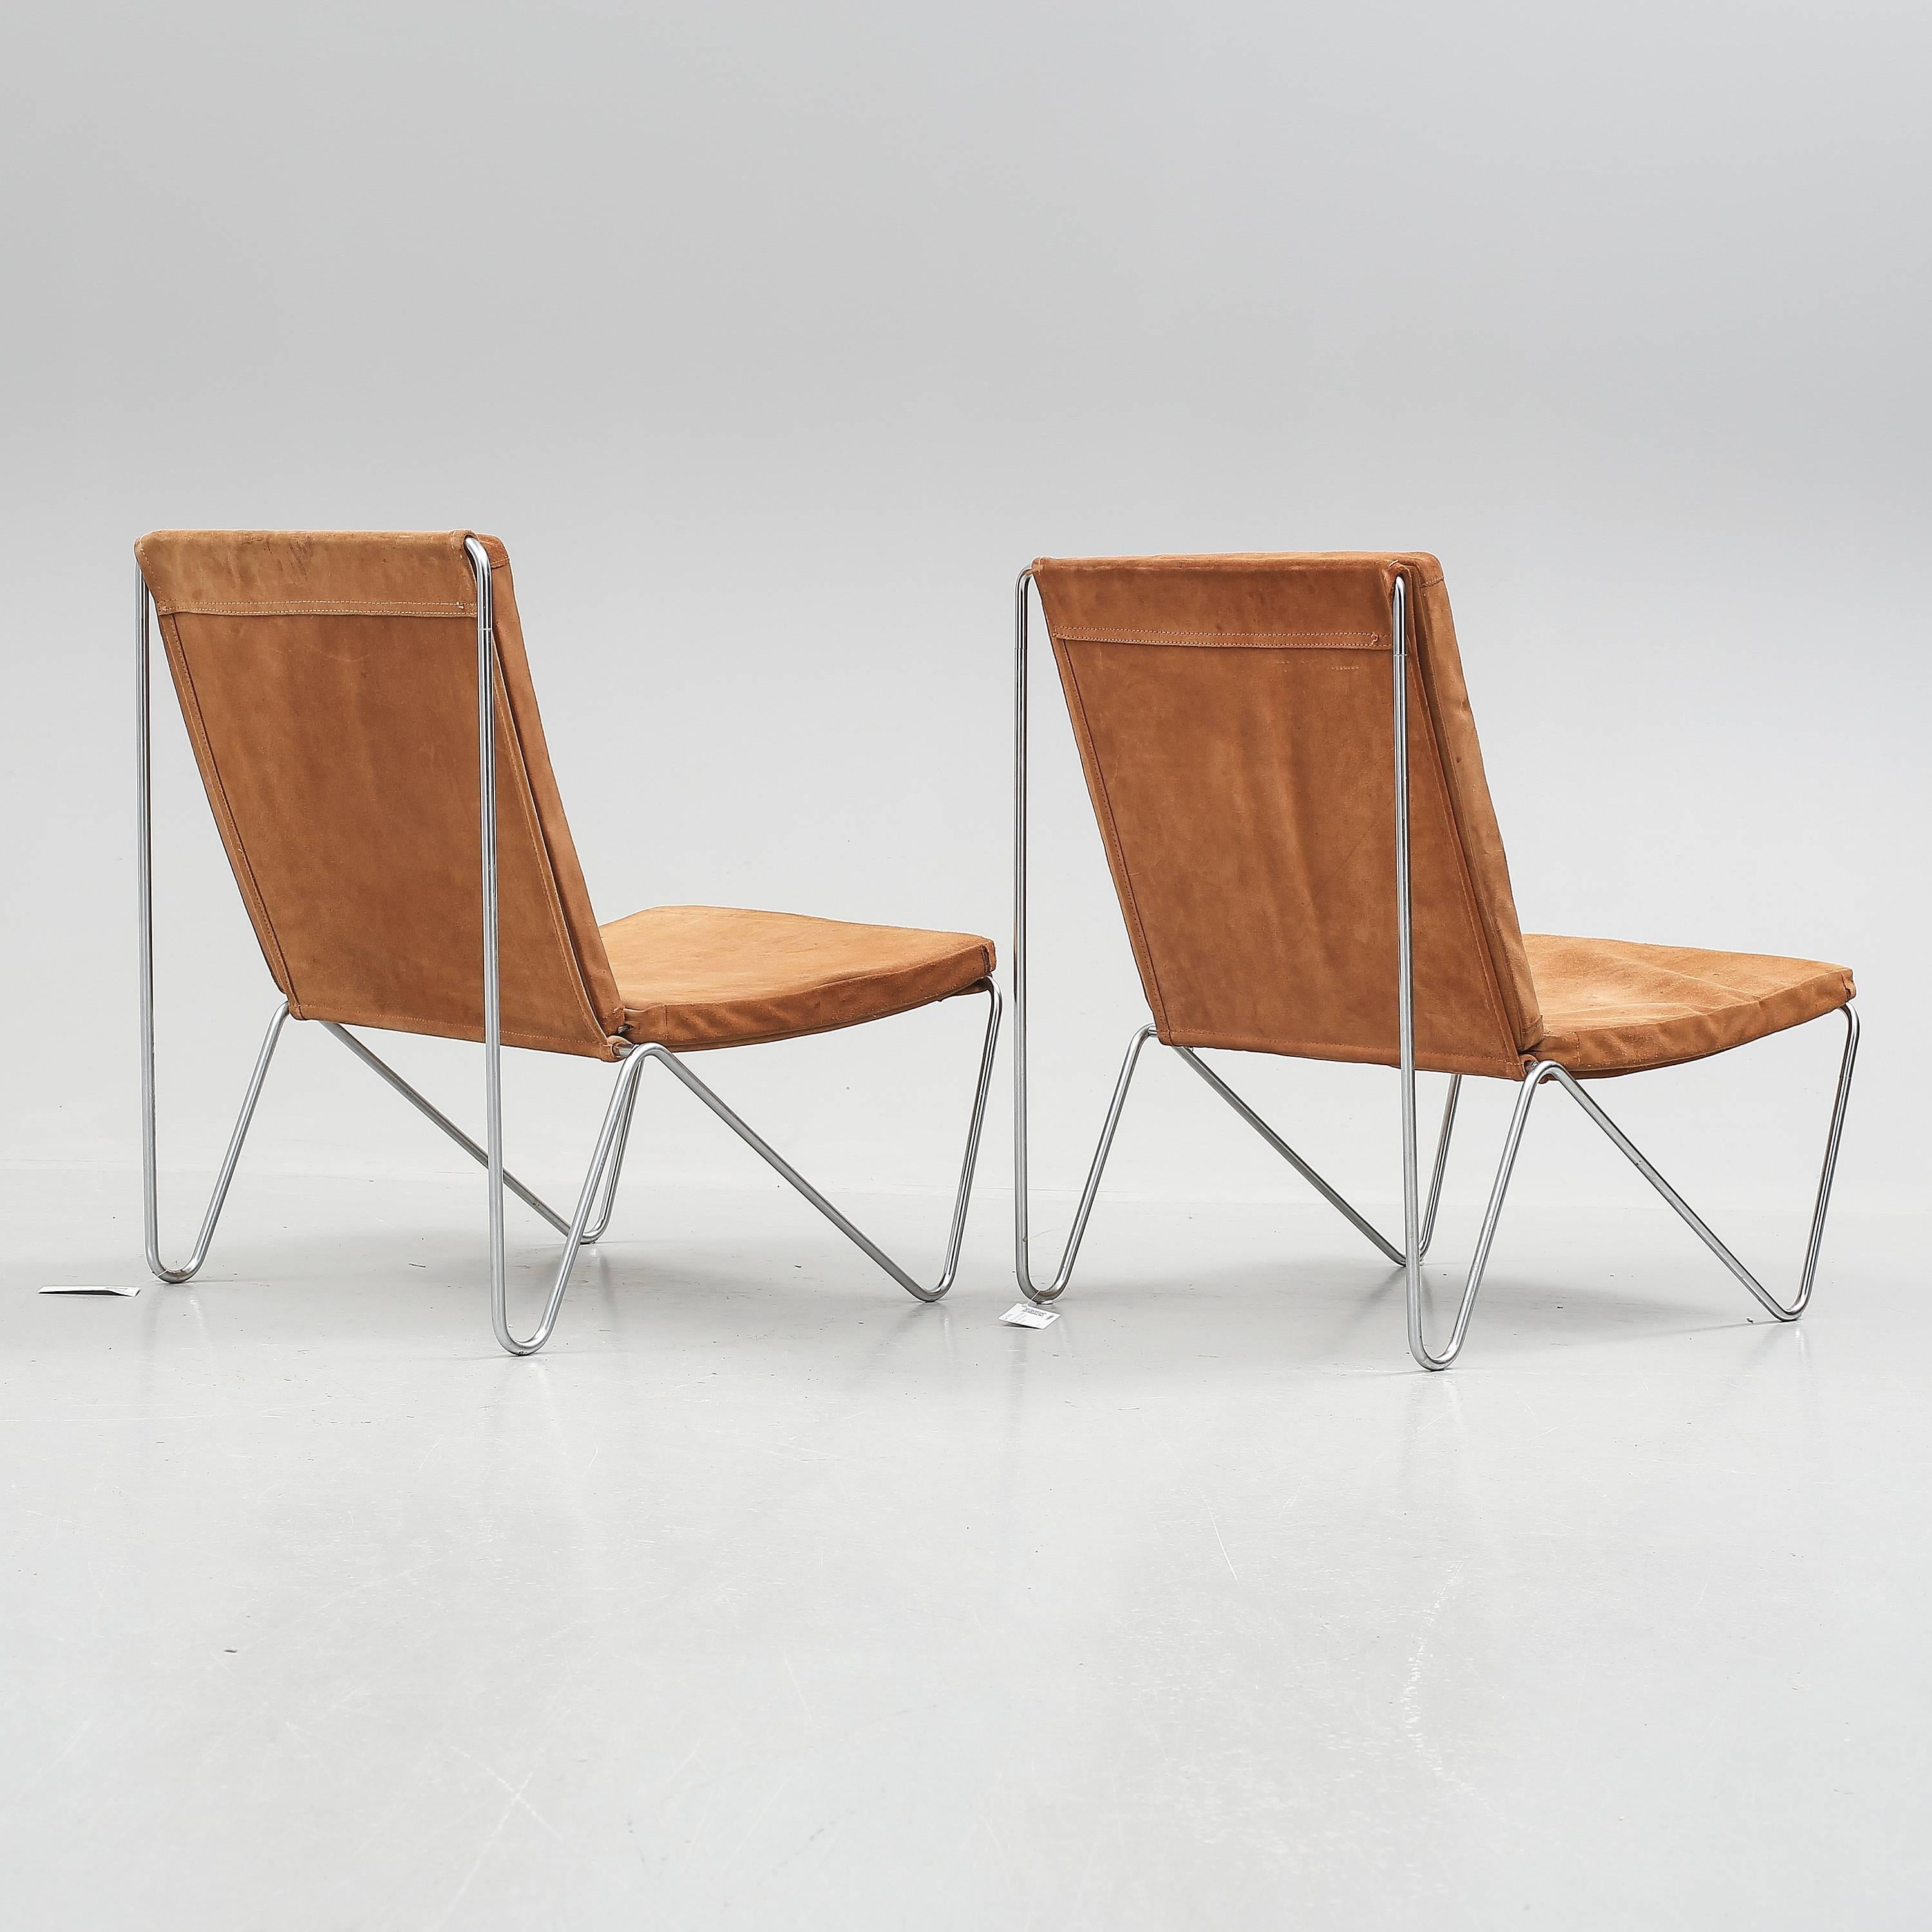 Rare Iconic pair of original bachelor chairs by Vernor Panton for Fritz Hansen, 1955, Denmark. Beautiful Patina. 